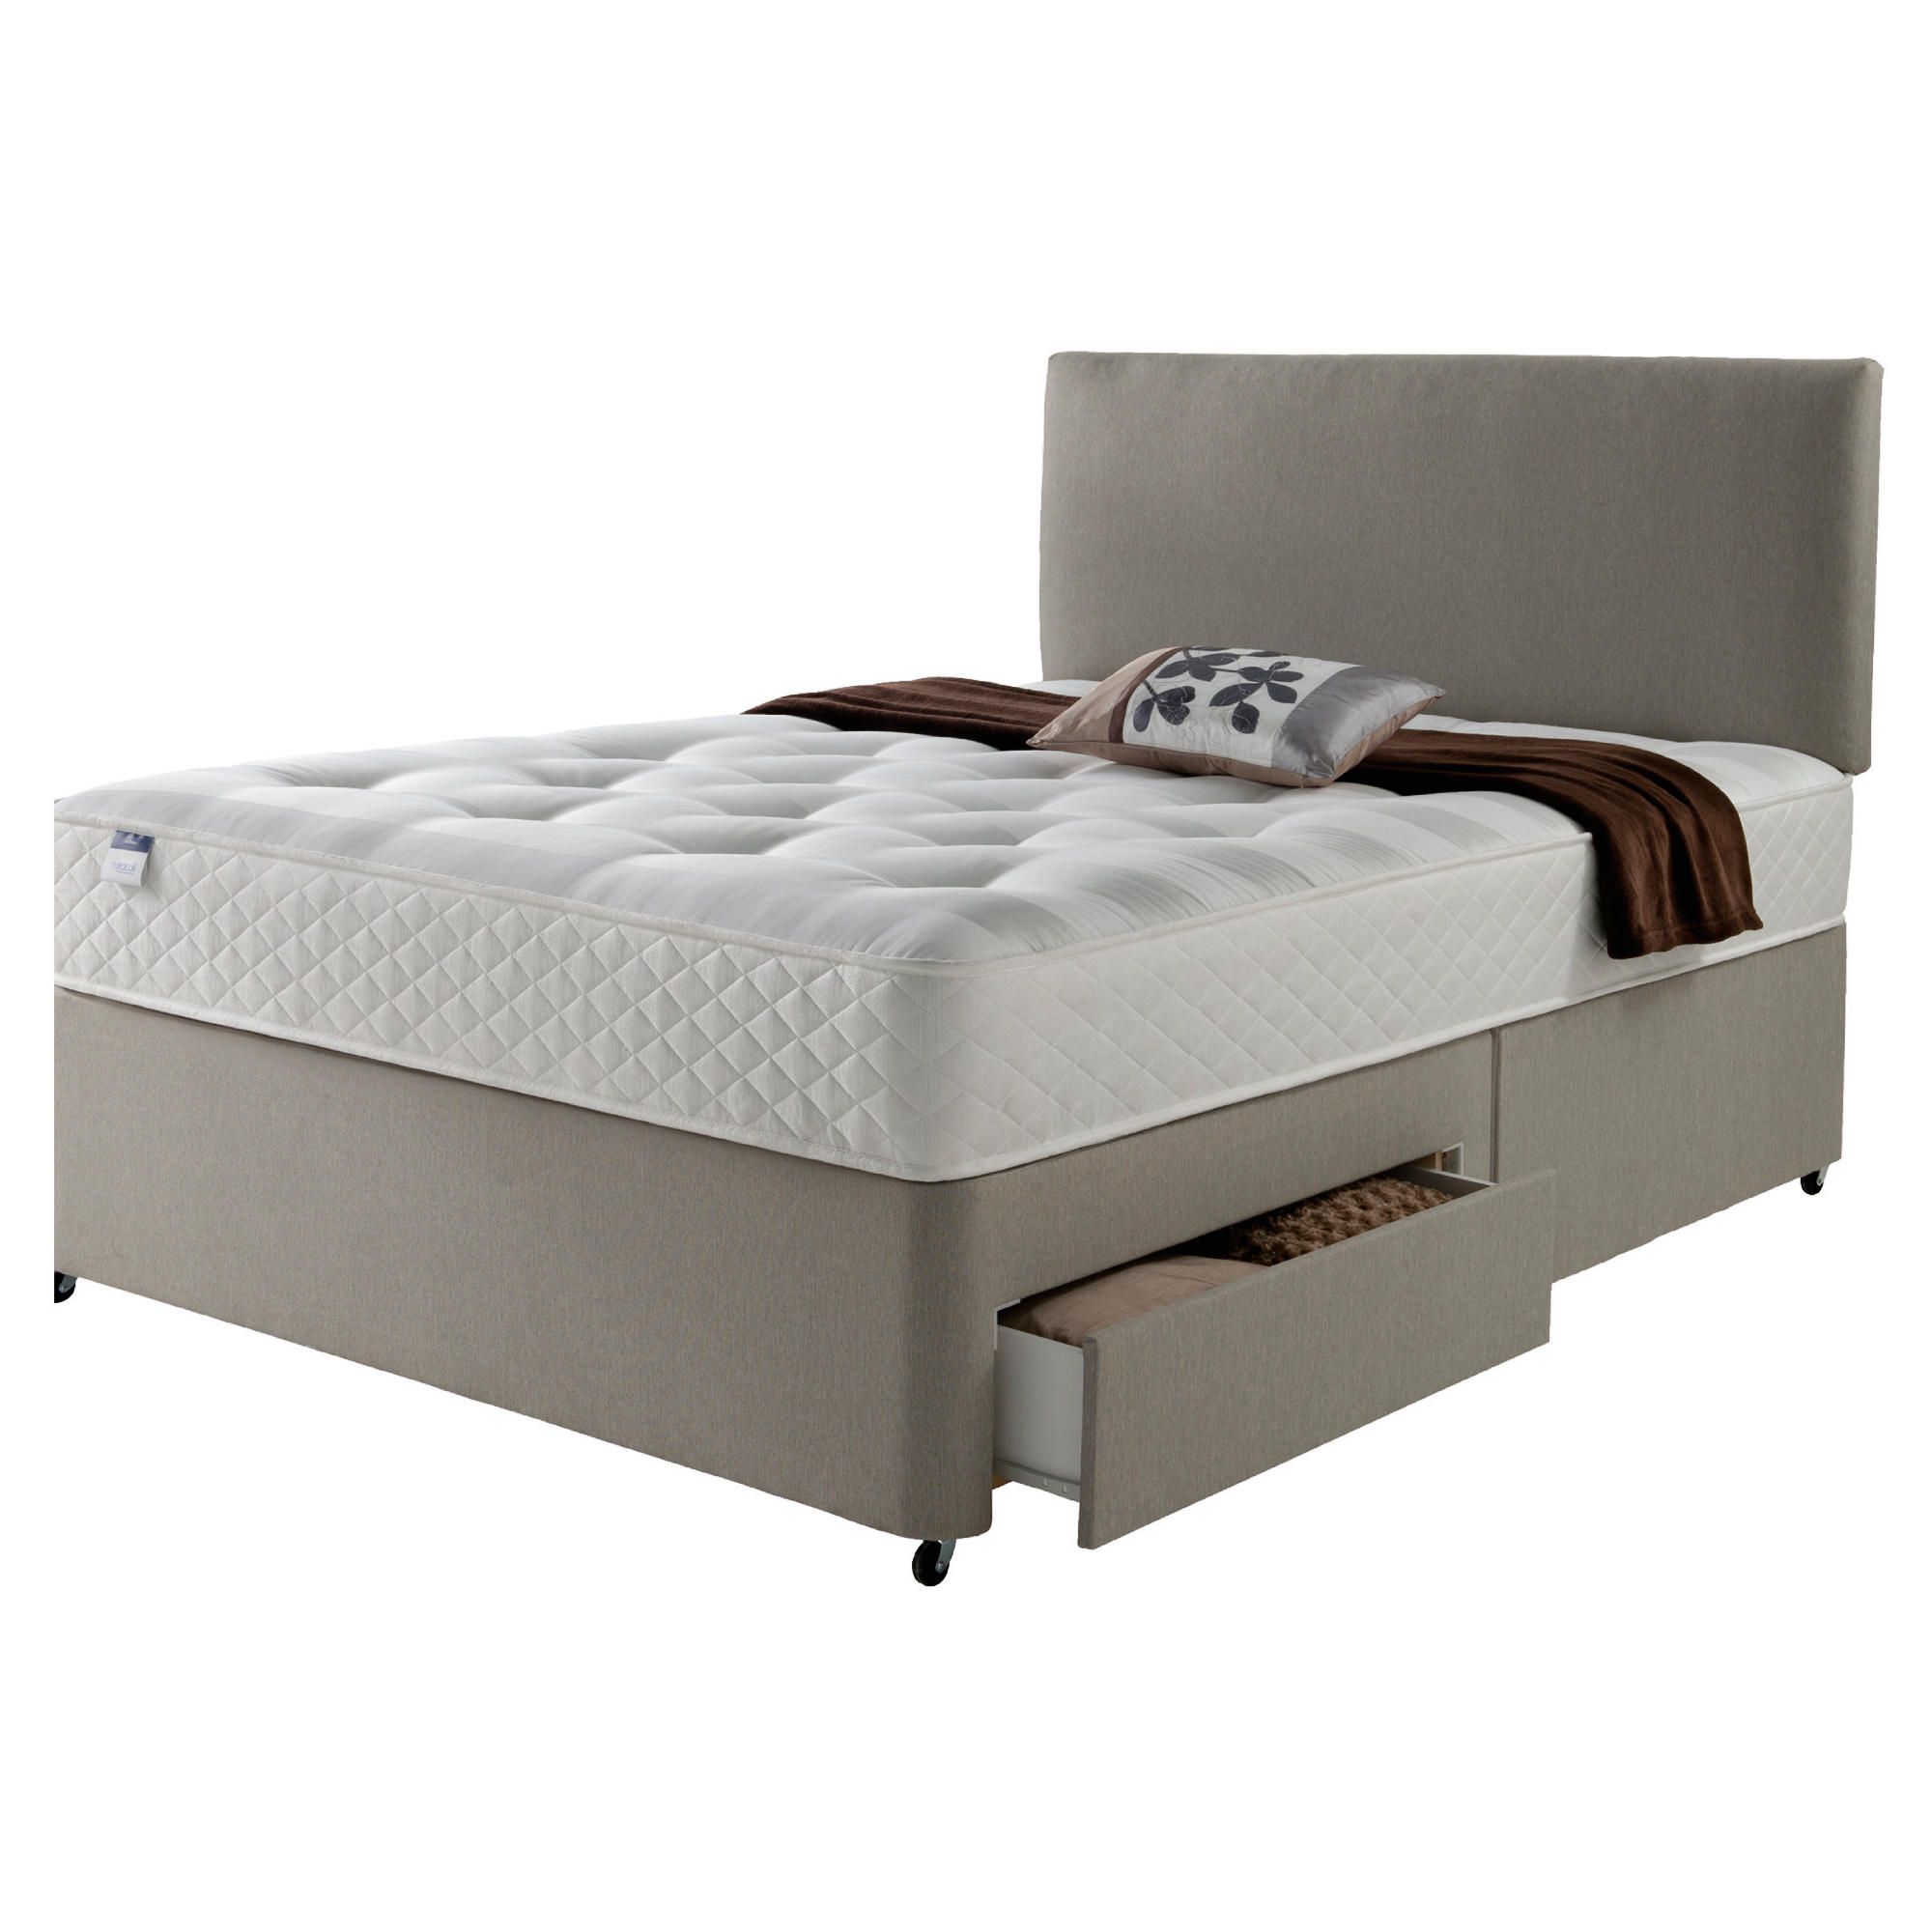 Silentnight Miracoil Luxury Ortho Tuft 4 Drawer Super King Divan Mink with Headboard at Tesco Direct